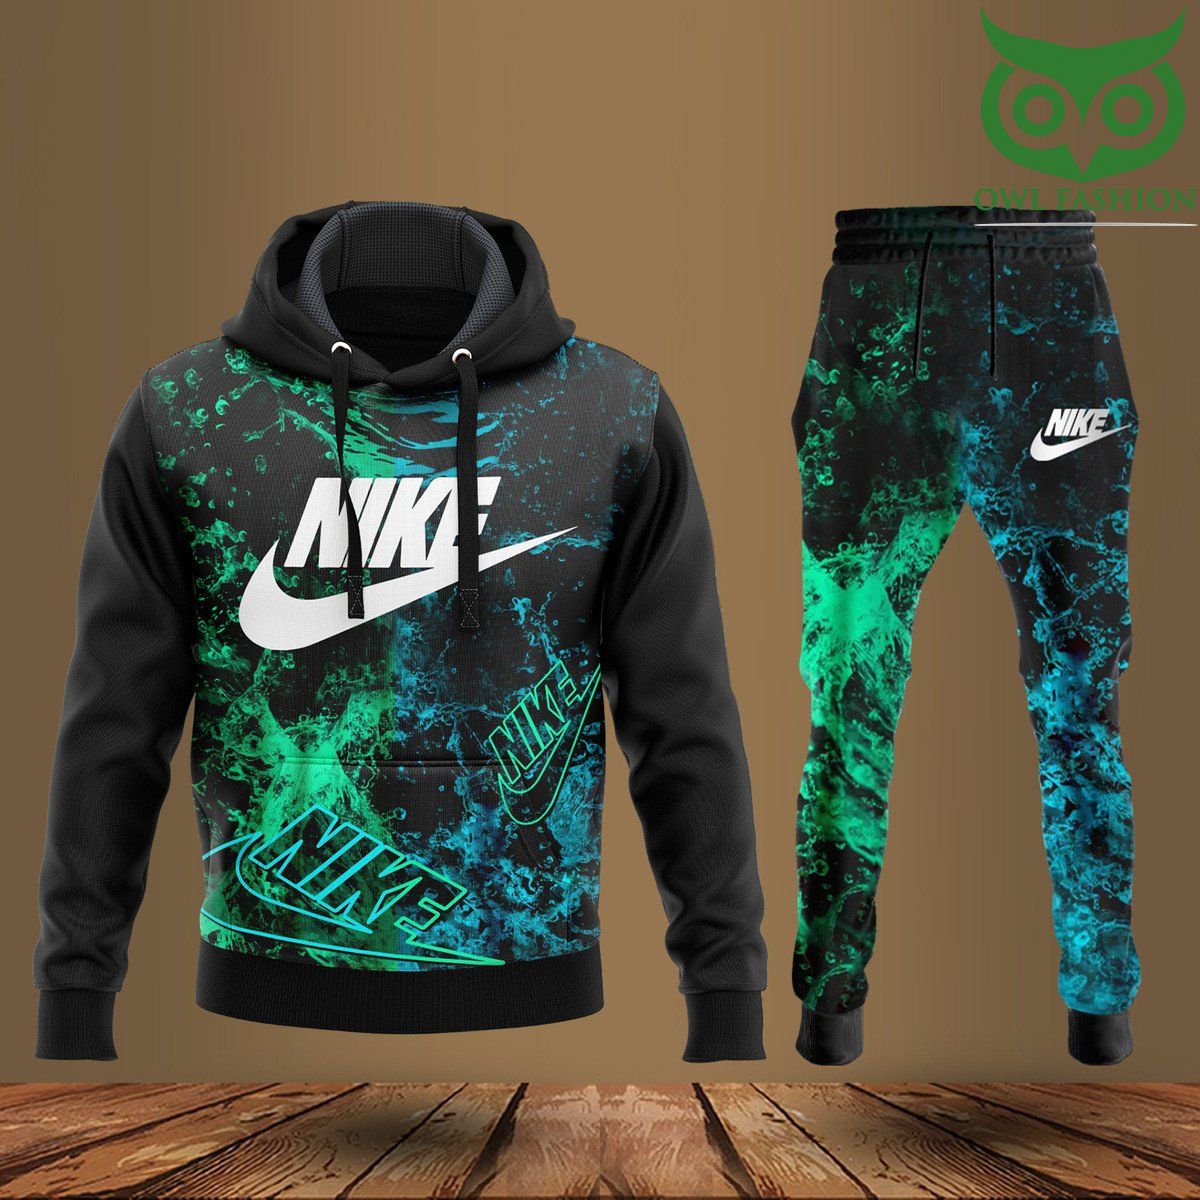 22 Nike green and blue galaxy hoodies and sweatpants